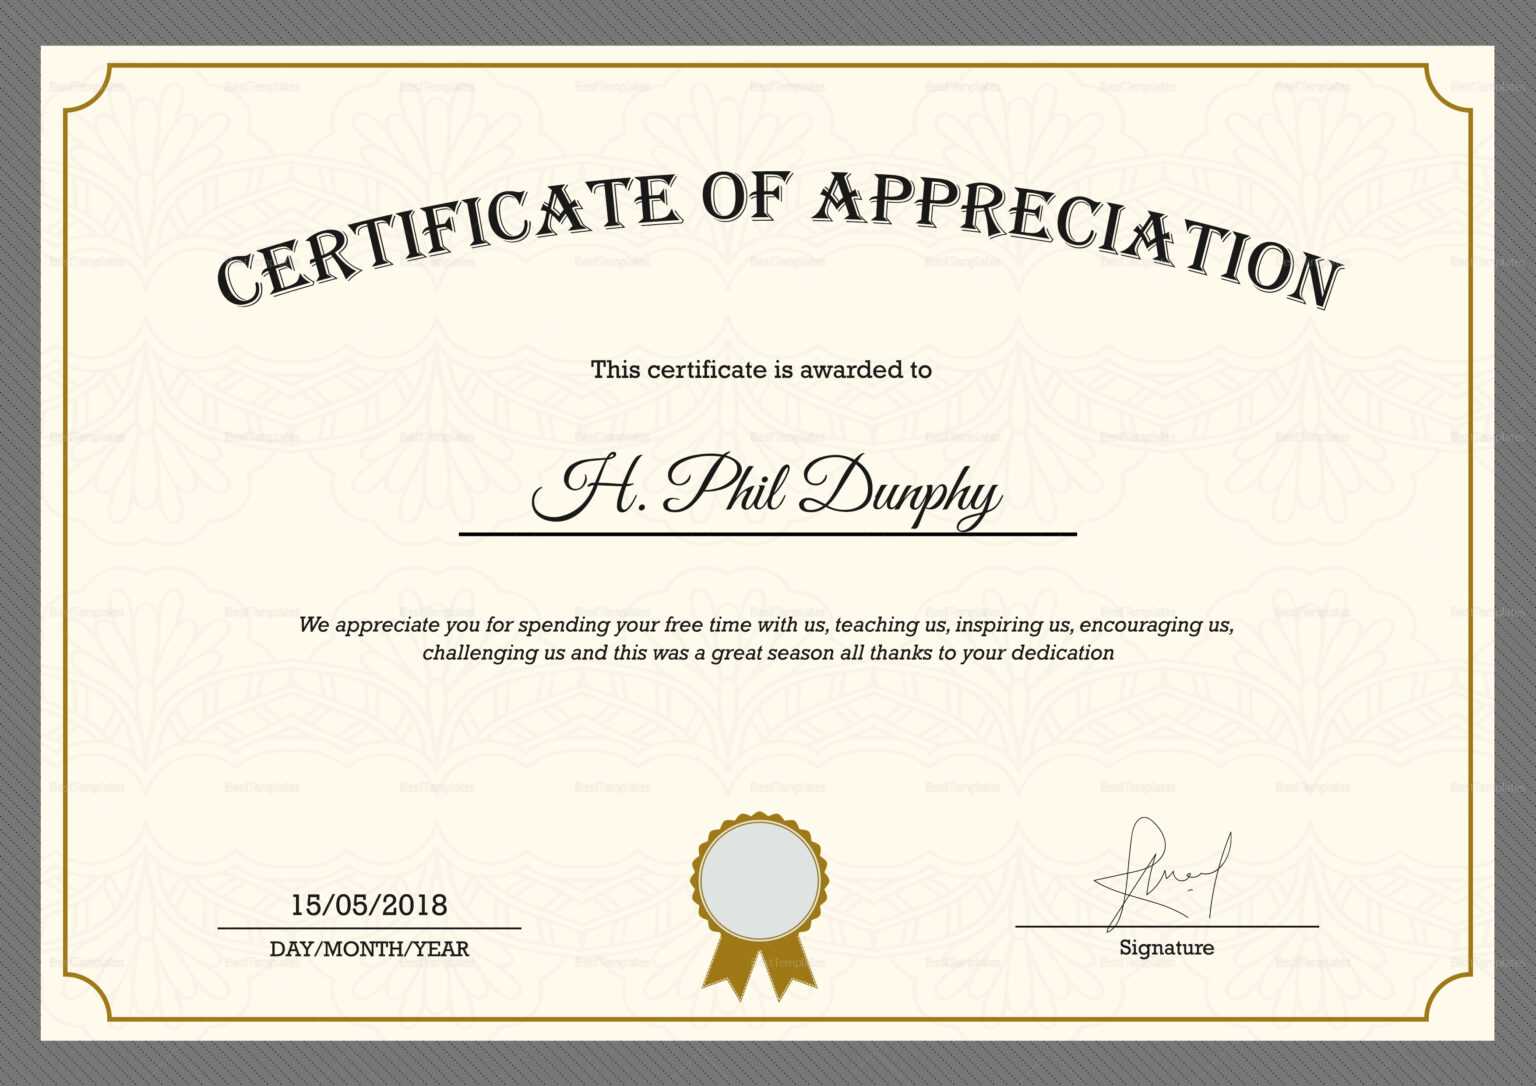 sample-company-appreciation-certificate-template-within-throughout-sample-certificate-of